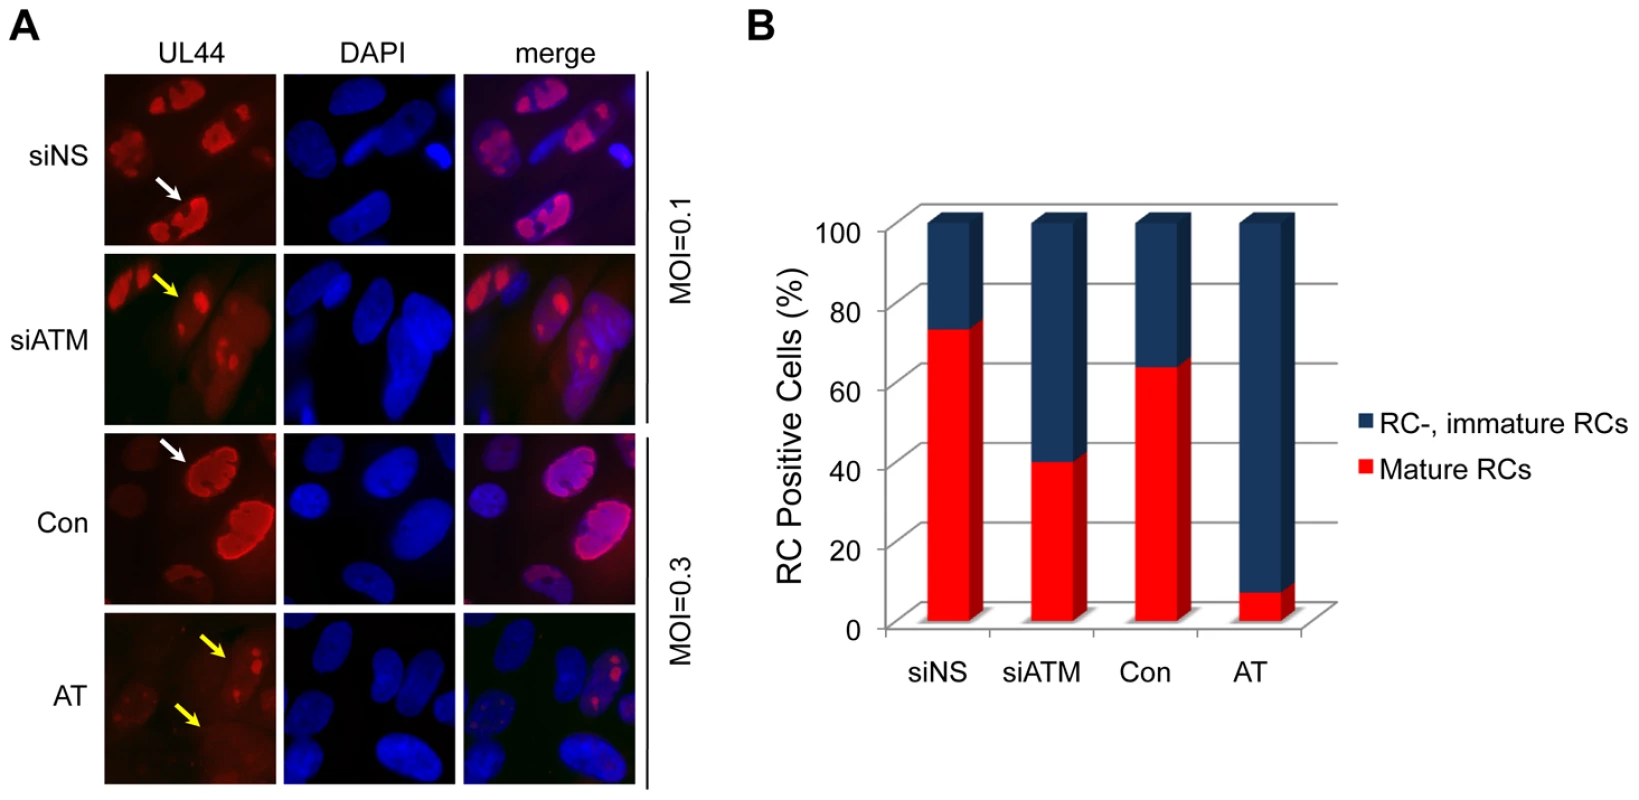 Reduced formation of “mature” viral replication compartments (RCs) in AT fibroblasts and siATM-transfected HEL fibroblasts.